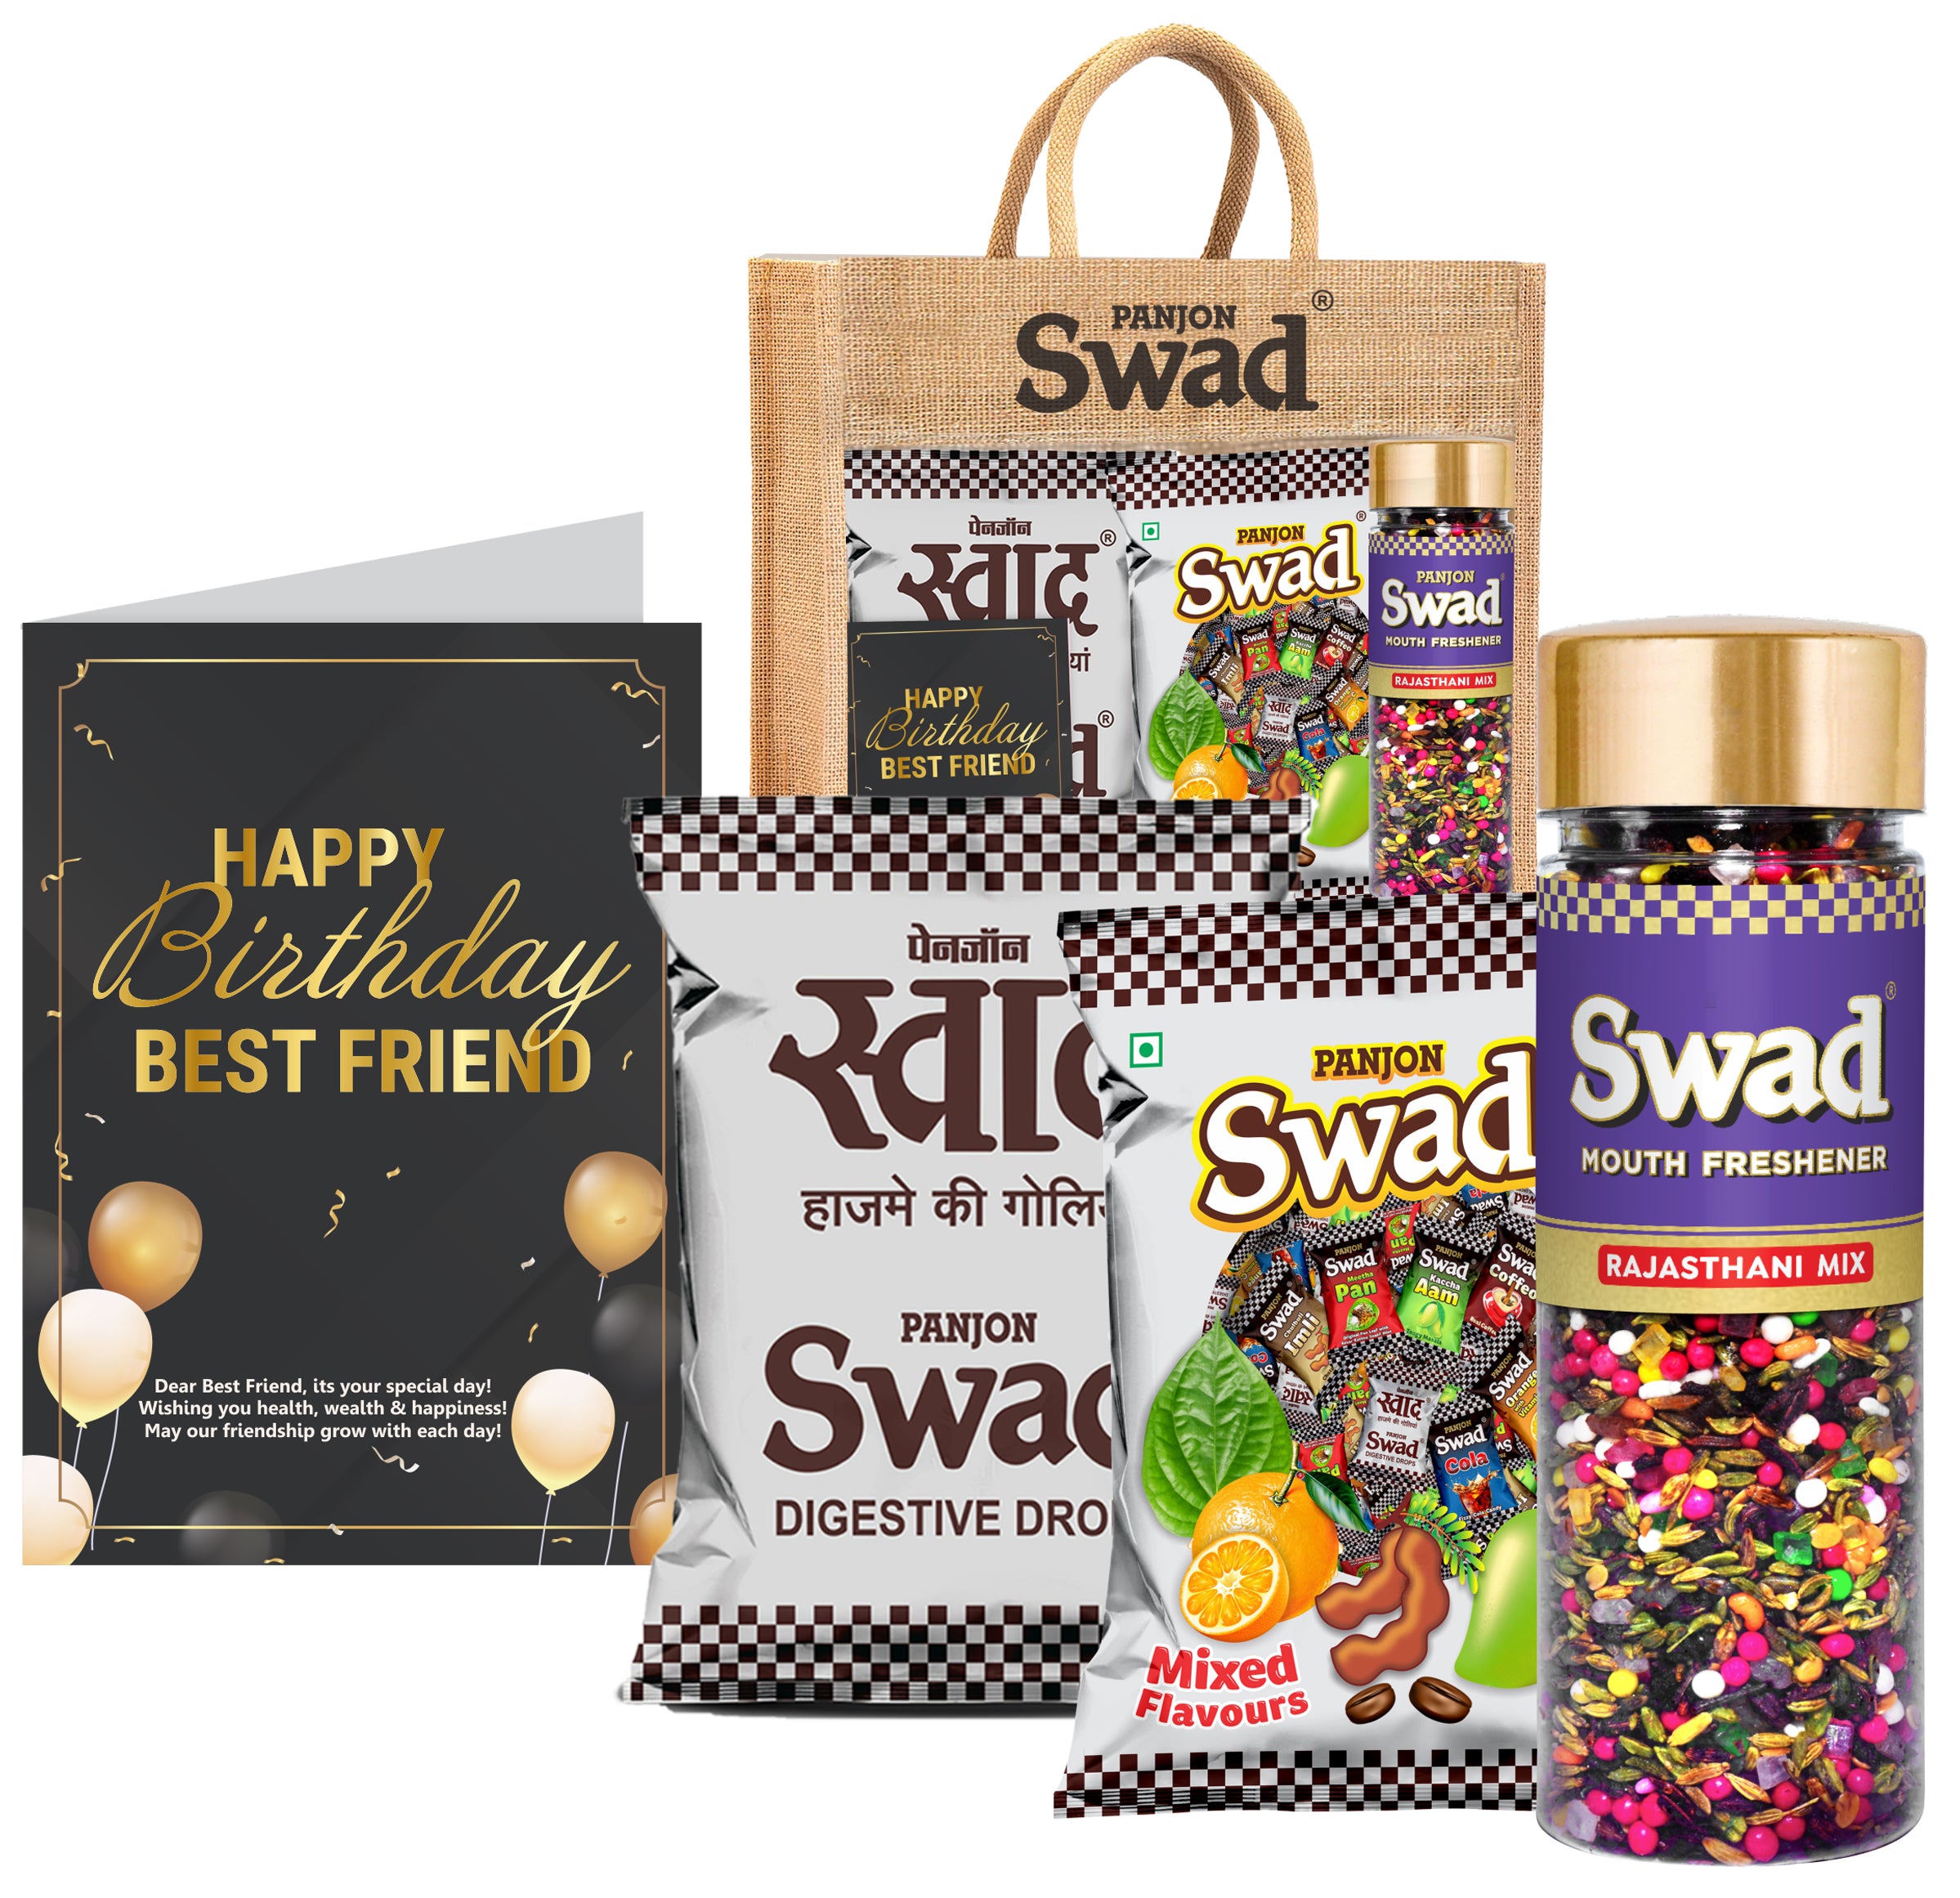 Swad Happy Birthday Best Friend Gift with Card (25 Swad Candy, 25 Mixed Toffee, Rajasthani Mix Mukhwas) in Jute Bag